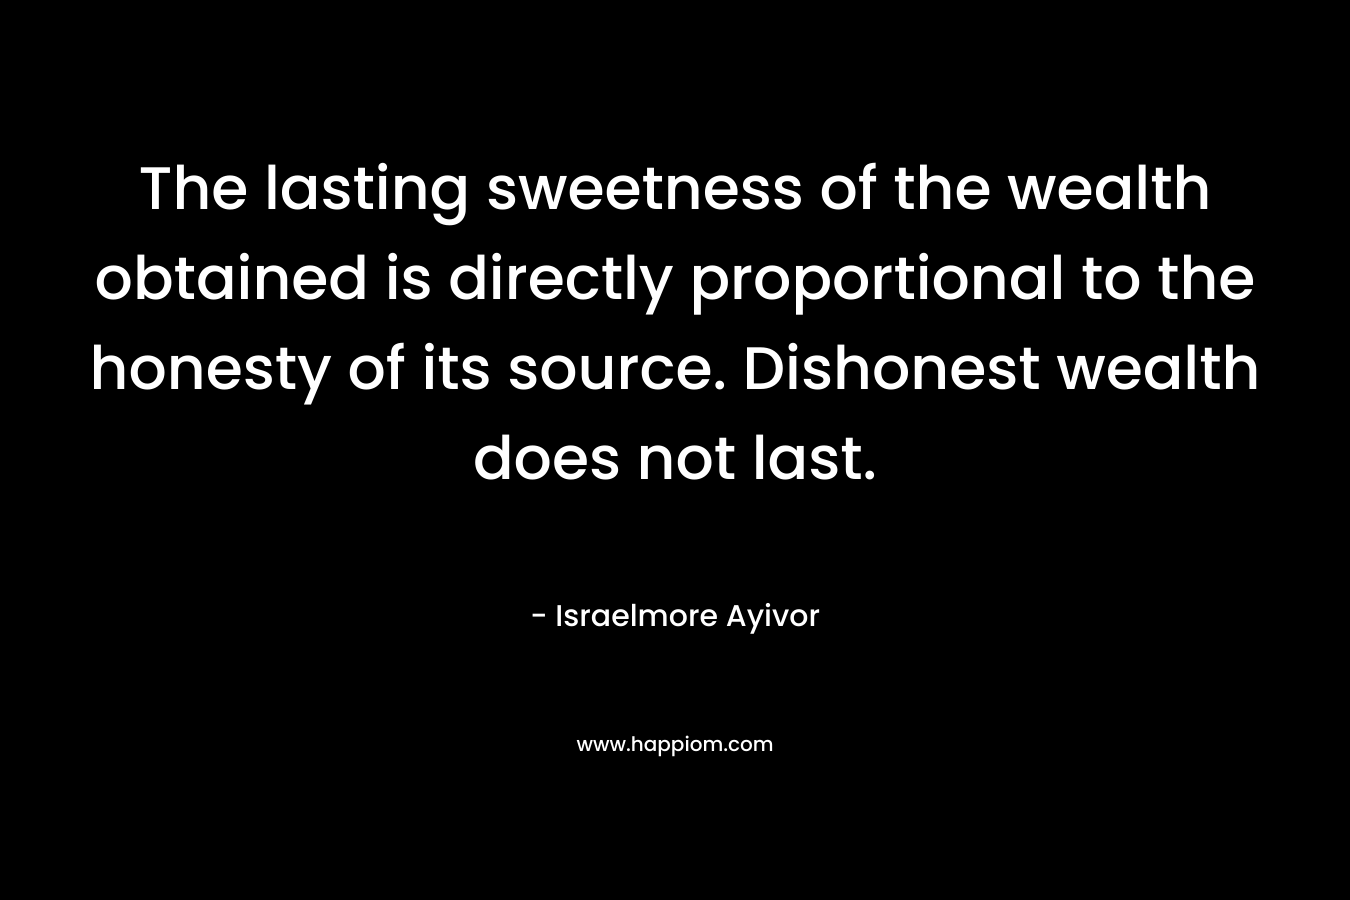 The lasting sweetness of the wealth obtained is directly proportional to the honesty of its source. Dishonest wealth does not last.